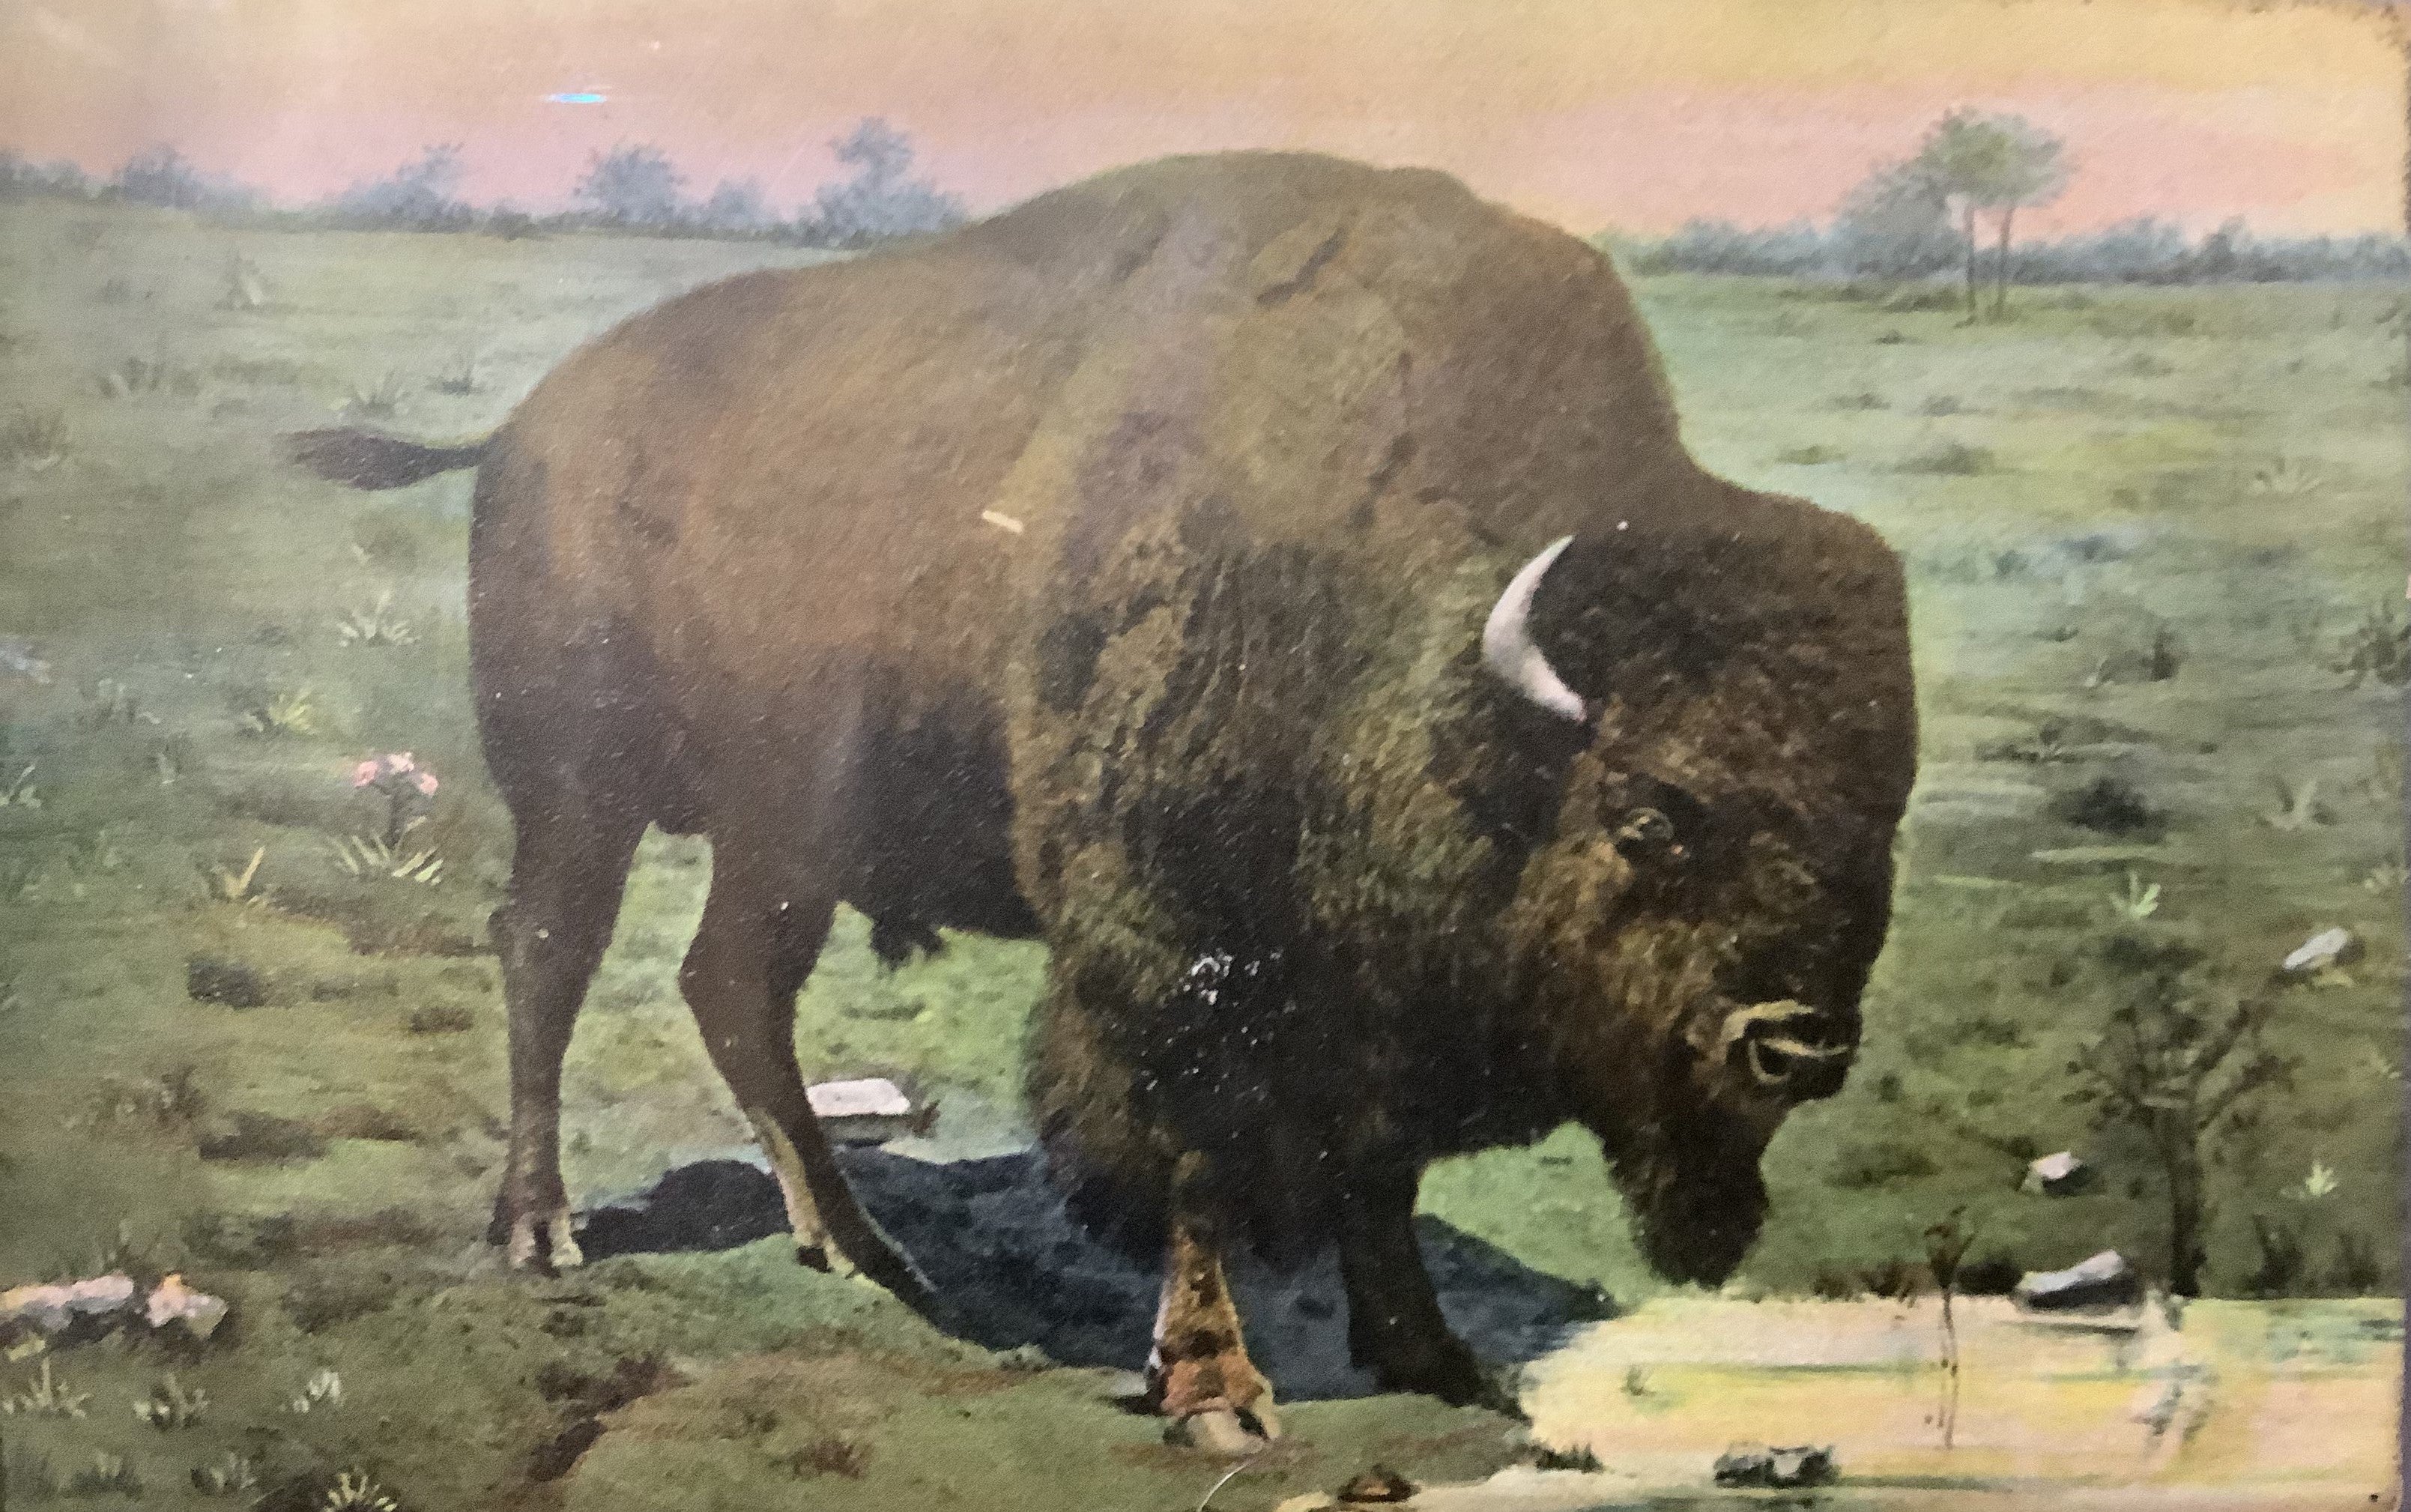 The "Collection - historic bison and bison related postcards